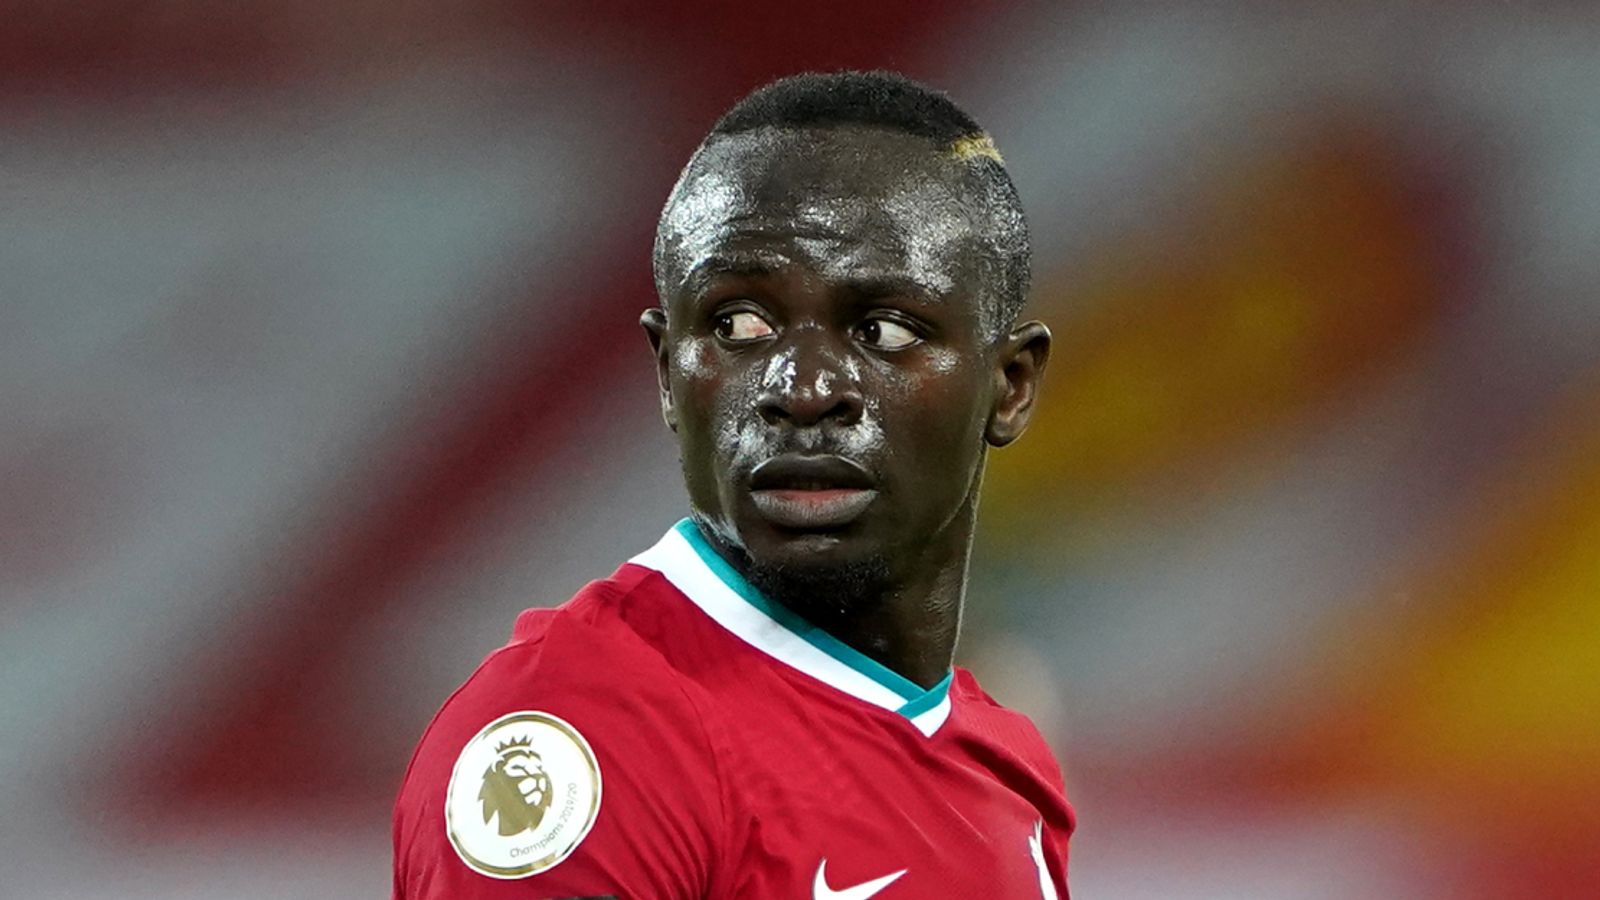 Africa Cup Of Nations Winner Sadio Mane Clears Hospital Bill For A Child With Life Threatening Injuries